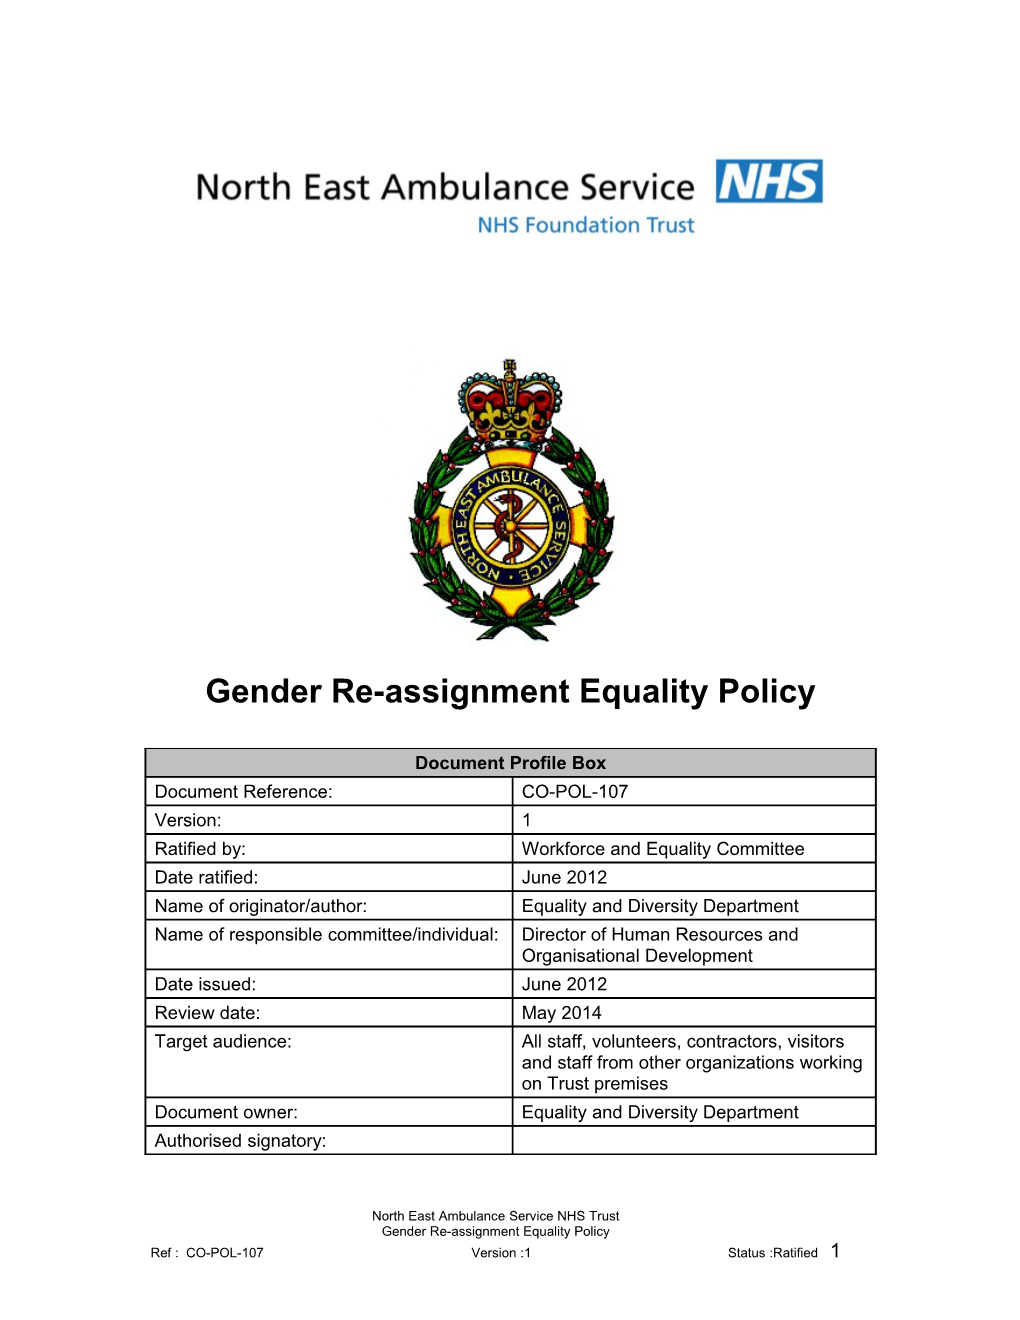 Gender Re-Assignment Equality Policy